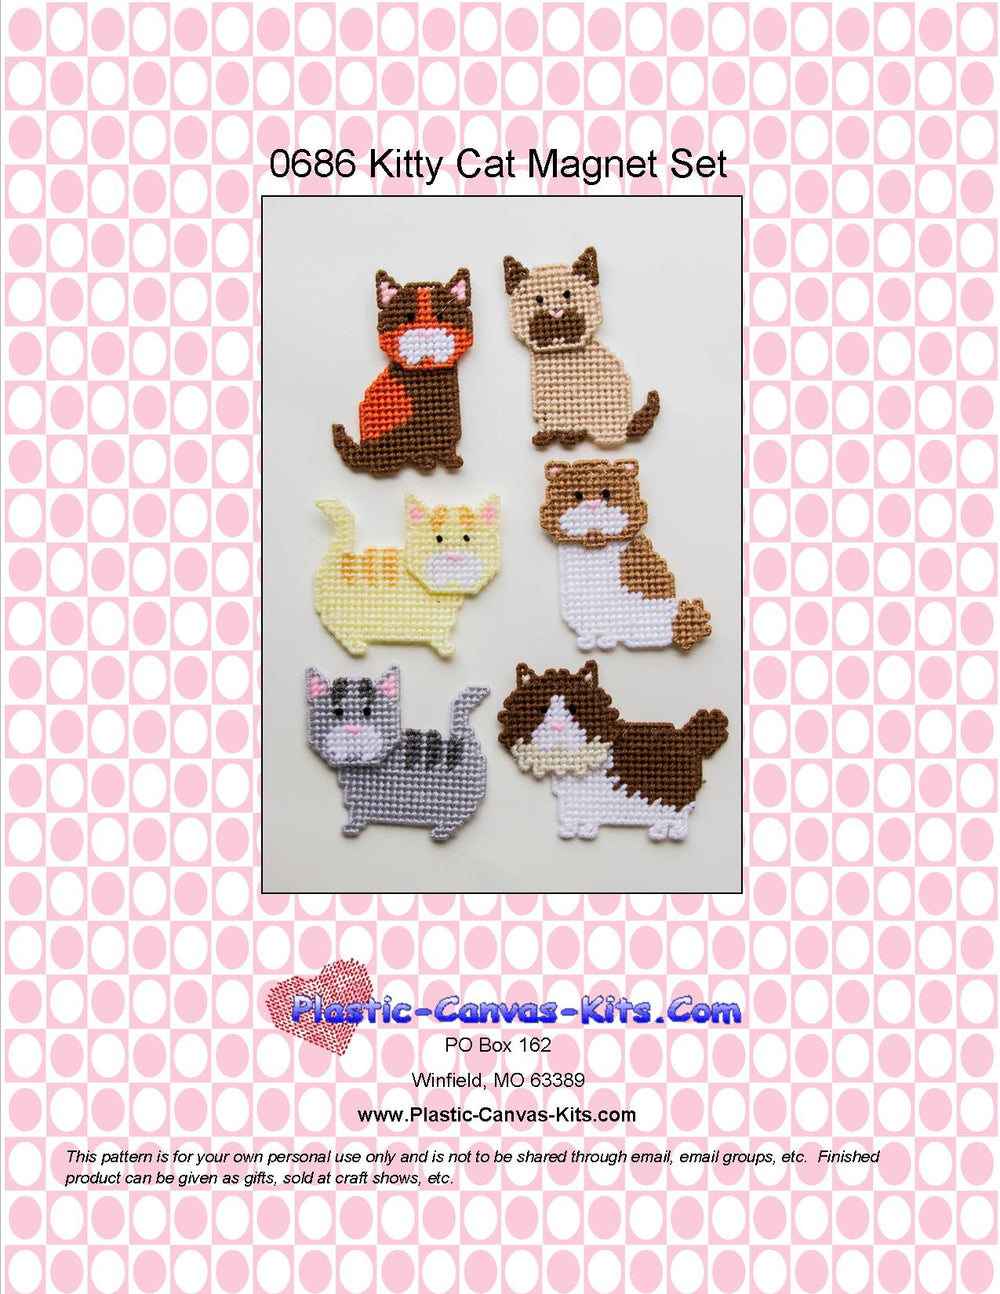 Kitty Cat Magnets